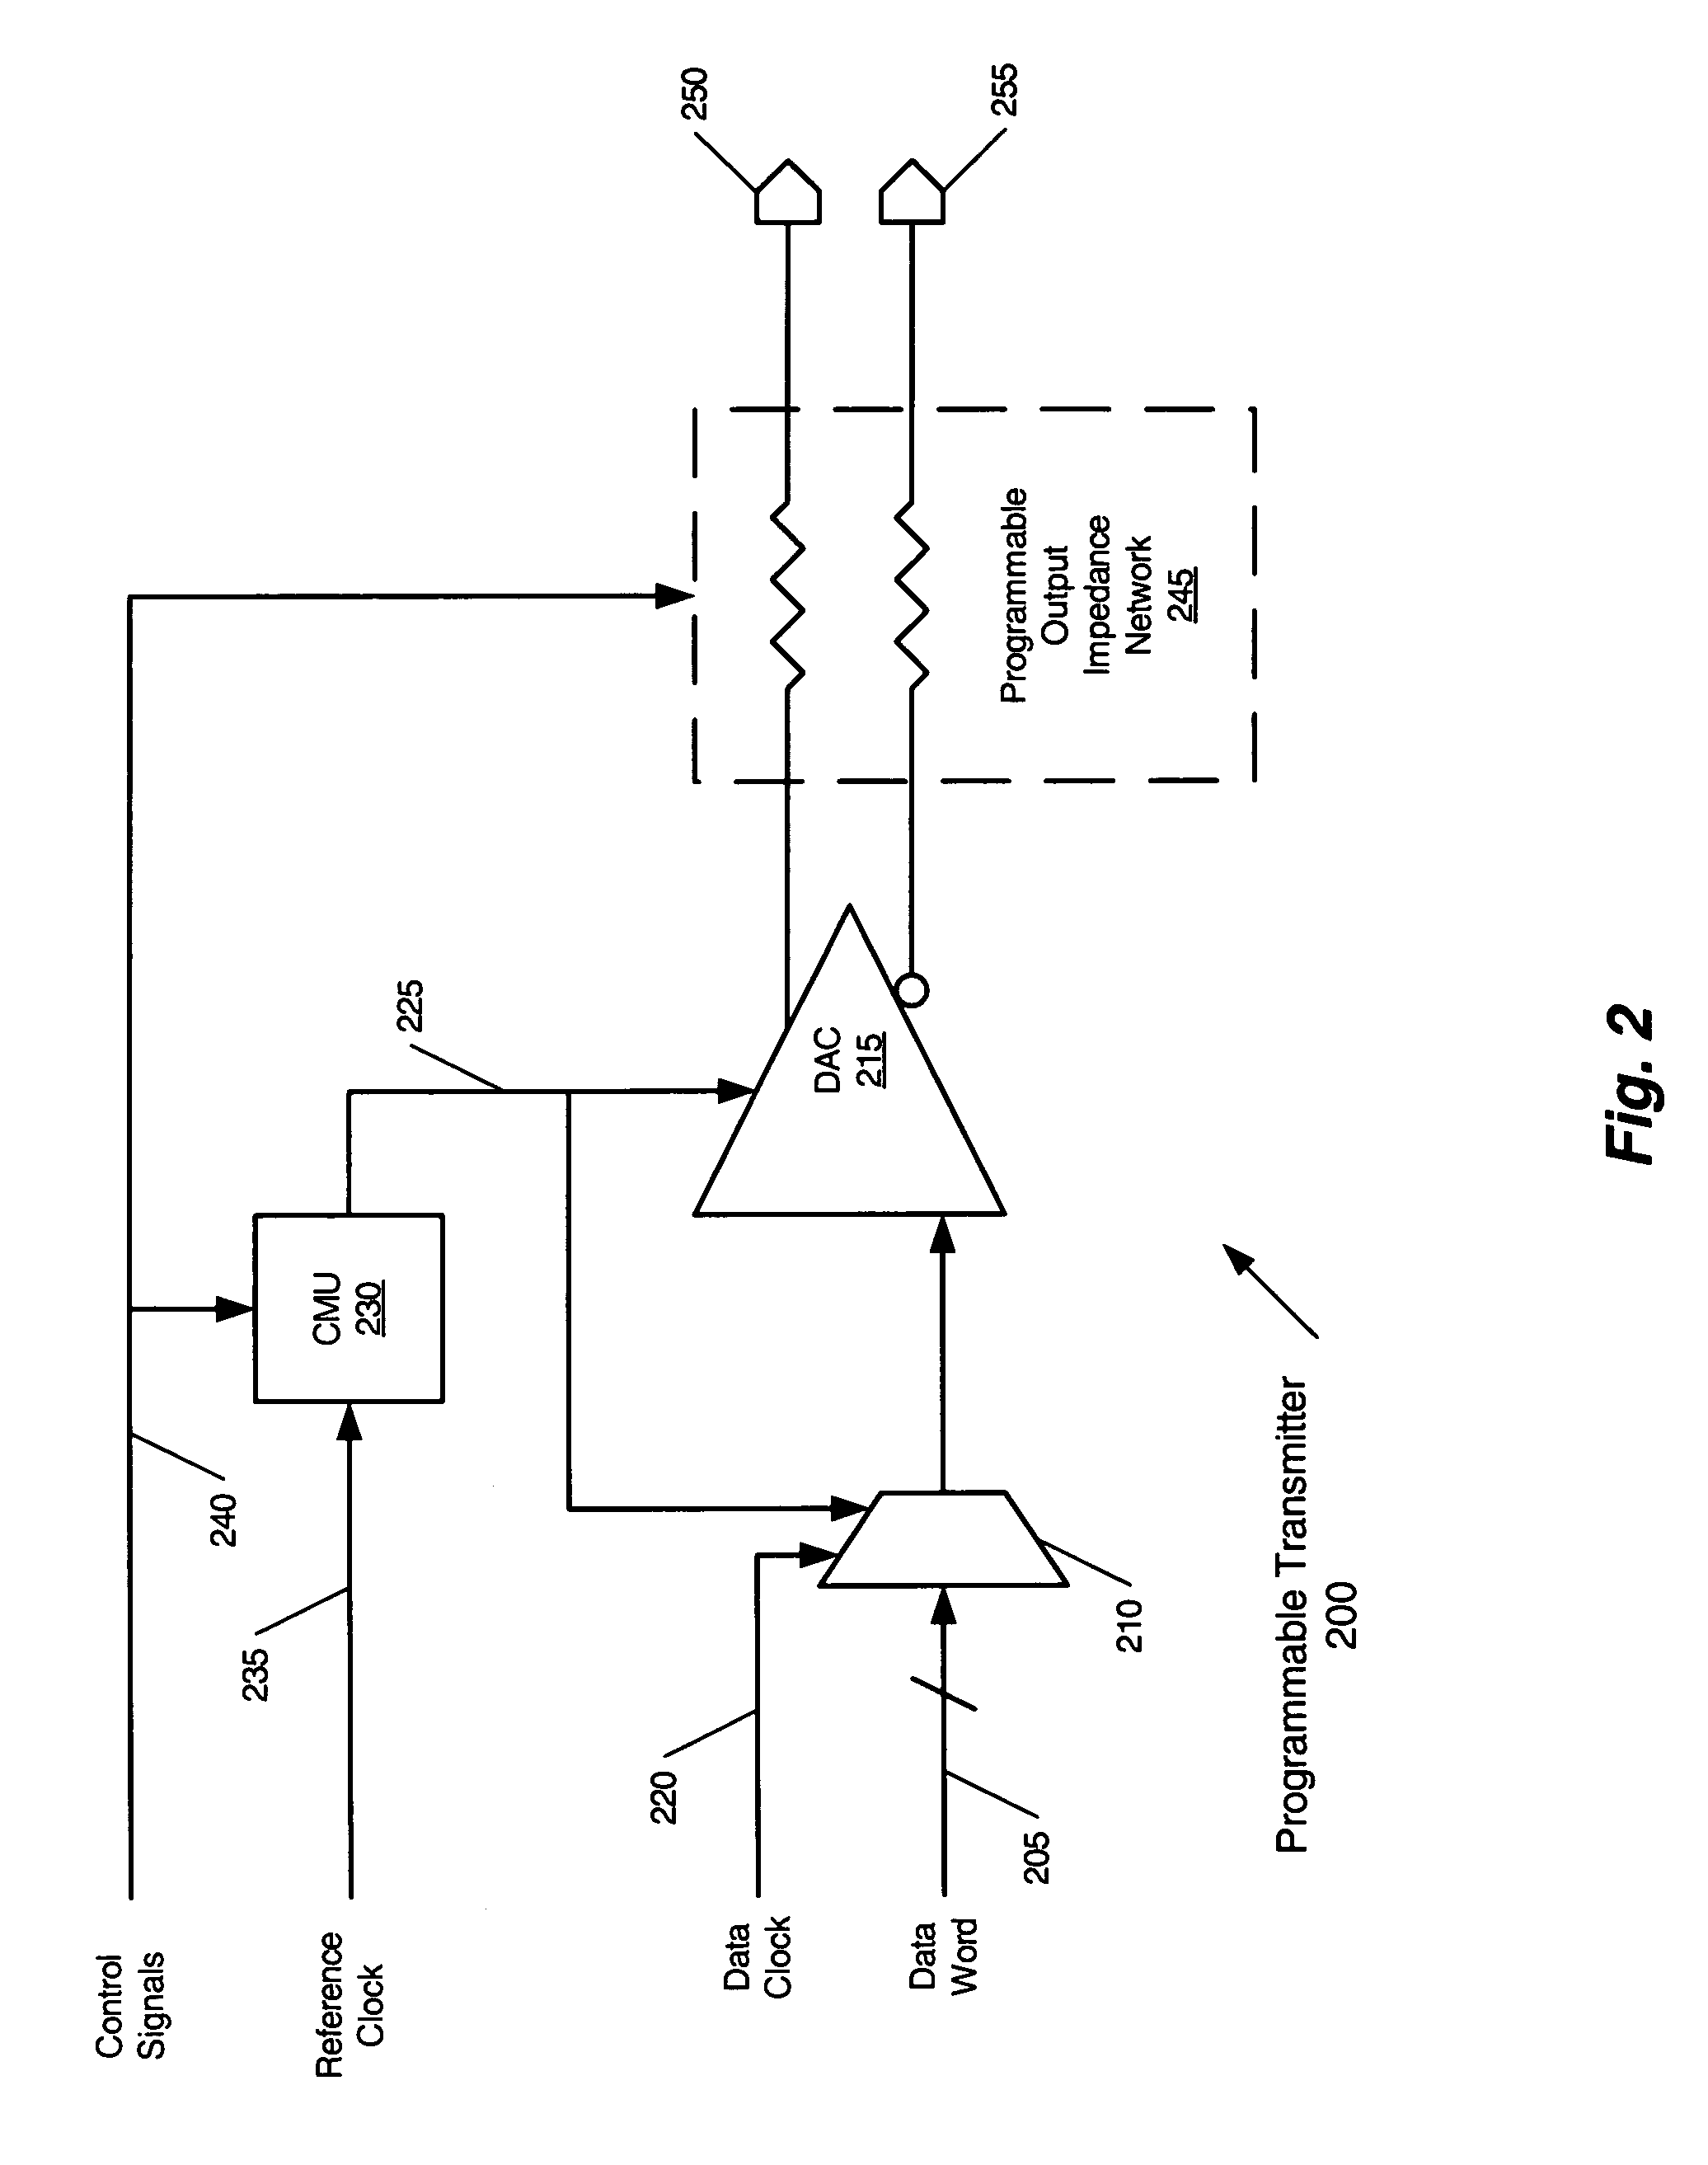 Method and system for programmable input/output transceiver wherein transceiver is configurable to support a plurality of interface standards